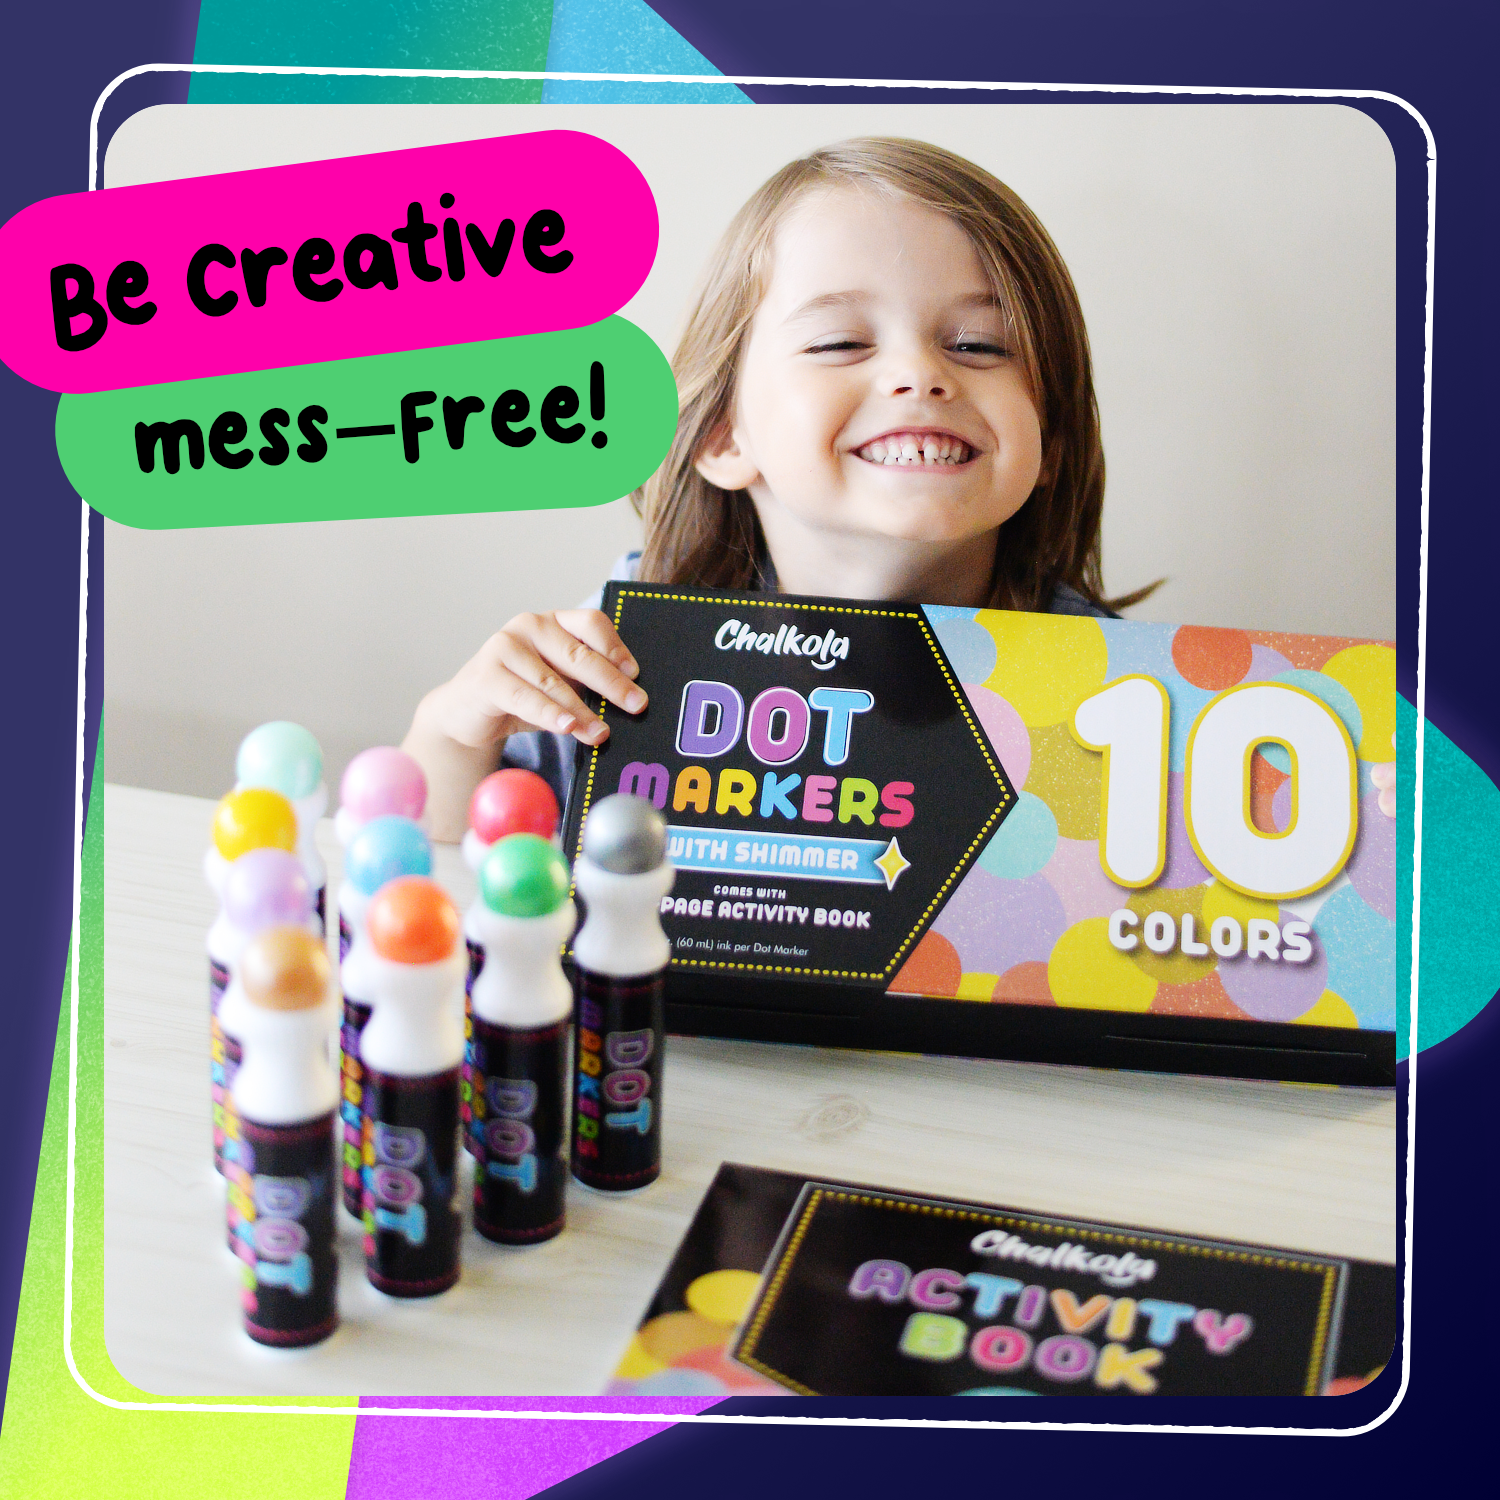 Chalkola Washable Dot Markers for Kids with Free Activity Book, 10 Colors  Set, Water-Based Non Toxic Paint Daubers, Dab Marker Kit for Toddlers &  Preschoolers, Fun Art Supplies